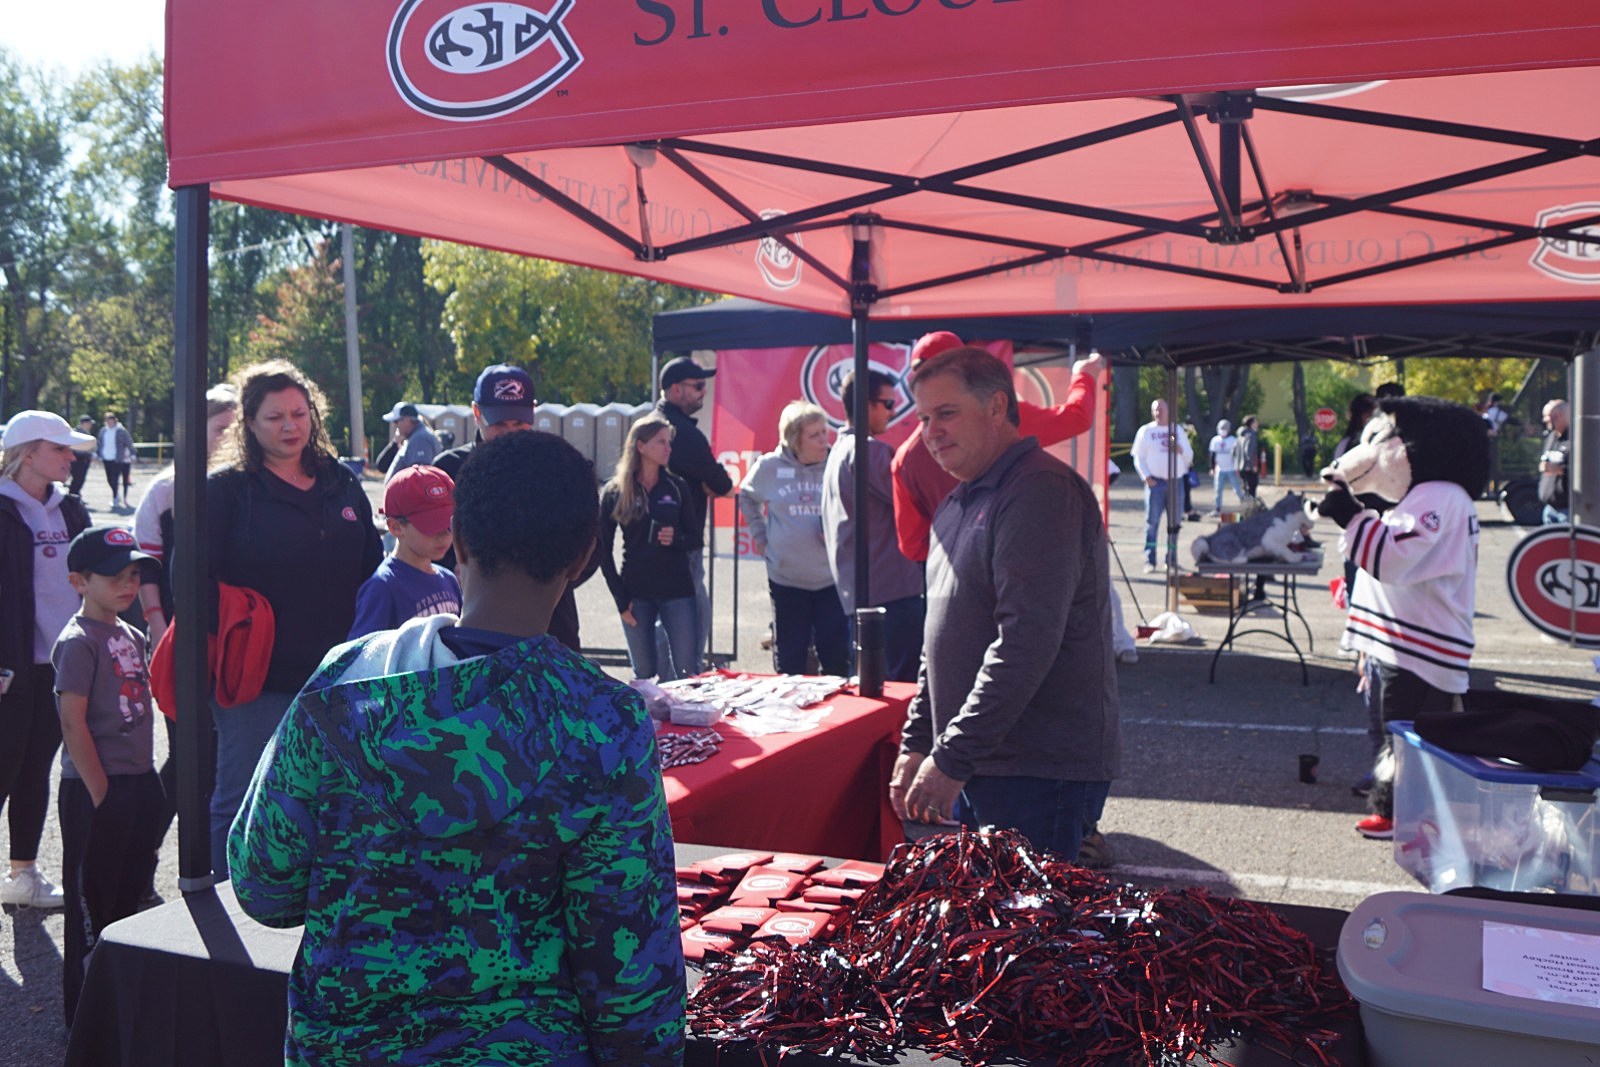 Huskies Celebrate Homecoming with Fan Fest at St